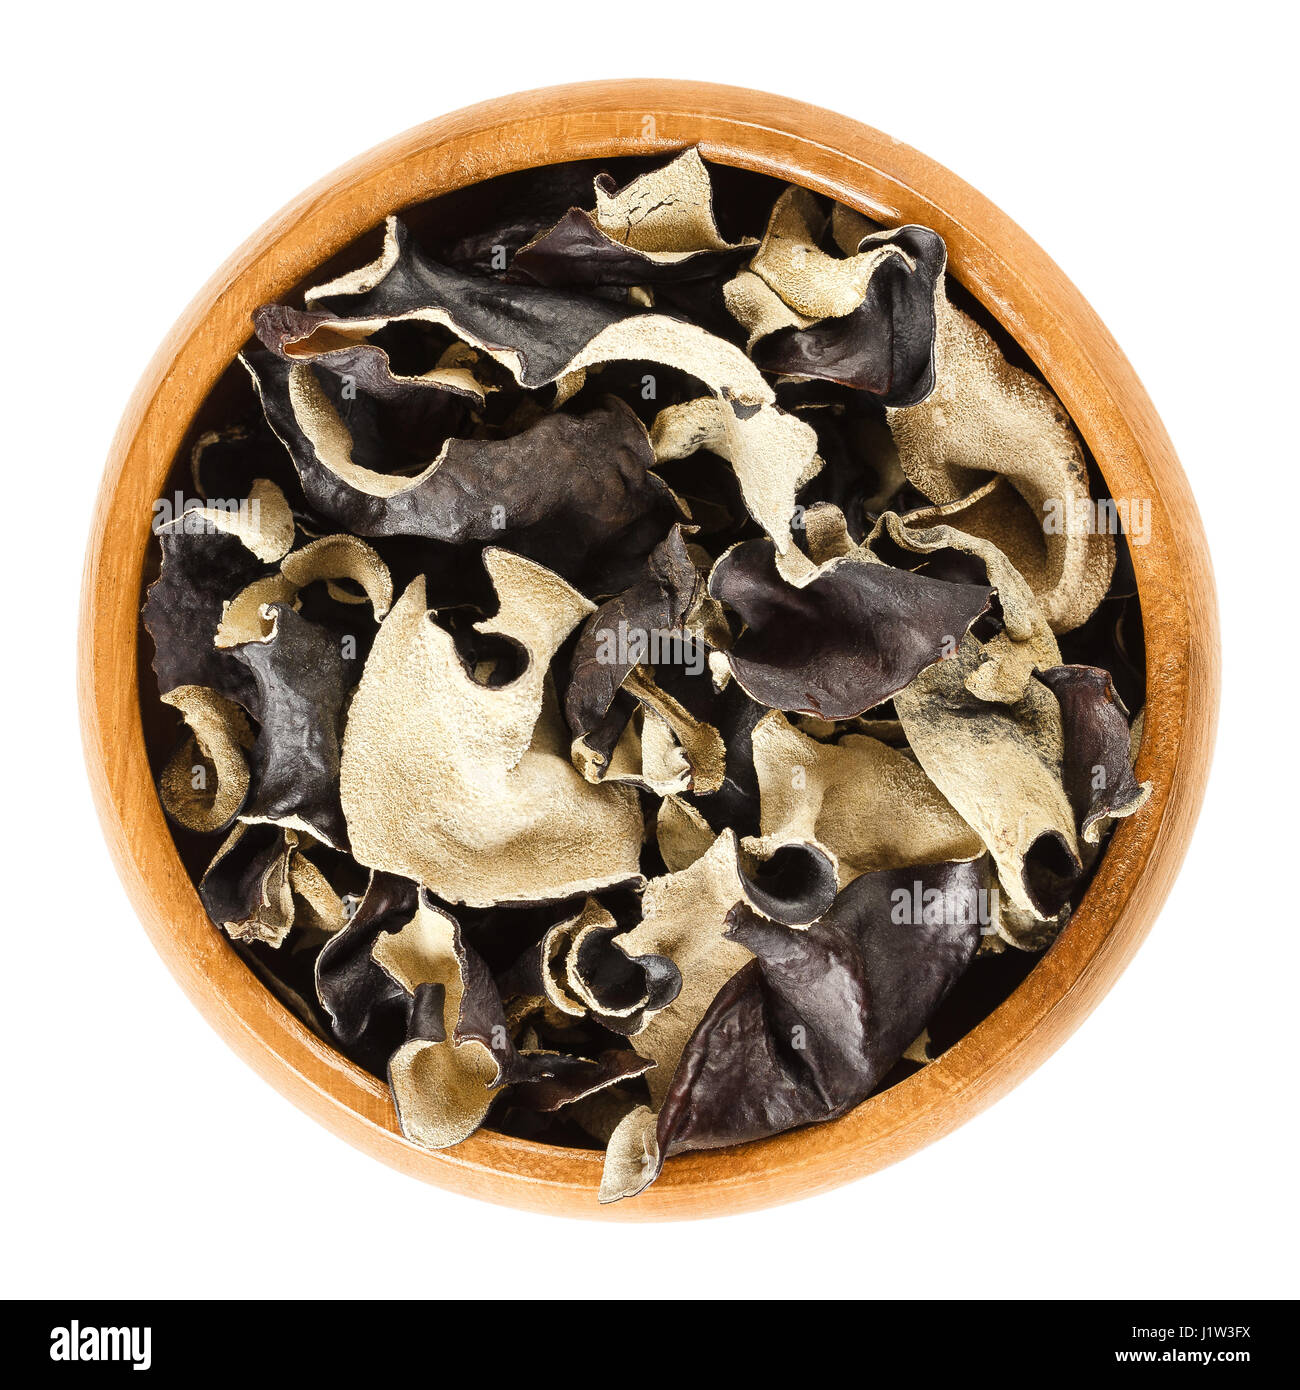 Dried black fungus in wooden bowl. Auricularia auricula-judae, also known as Jew's, wood or jelly ear, or Mu Err. Ingredient in Chinese dishes. Stock Photo